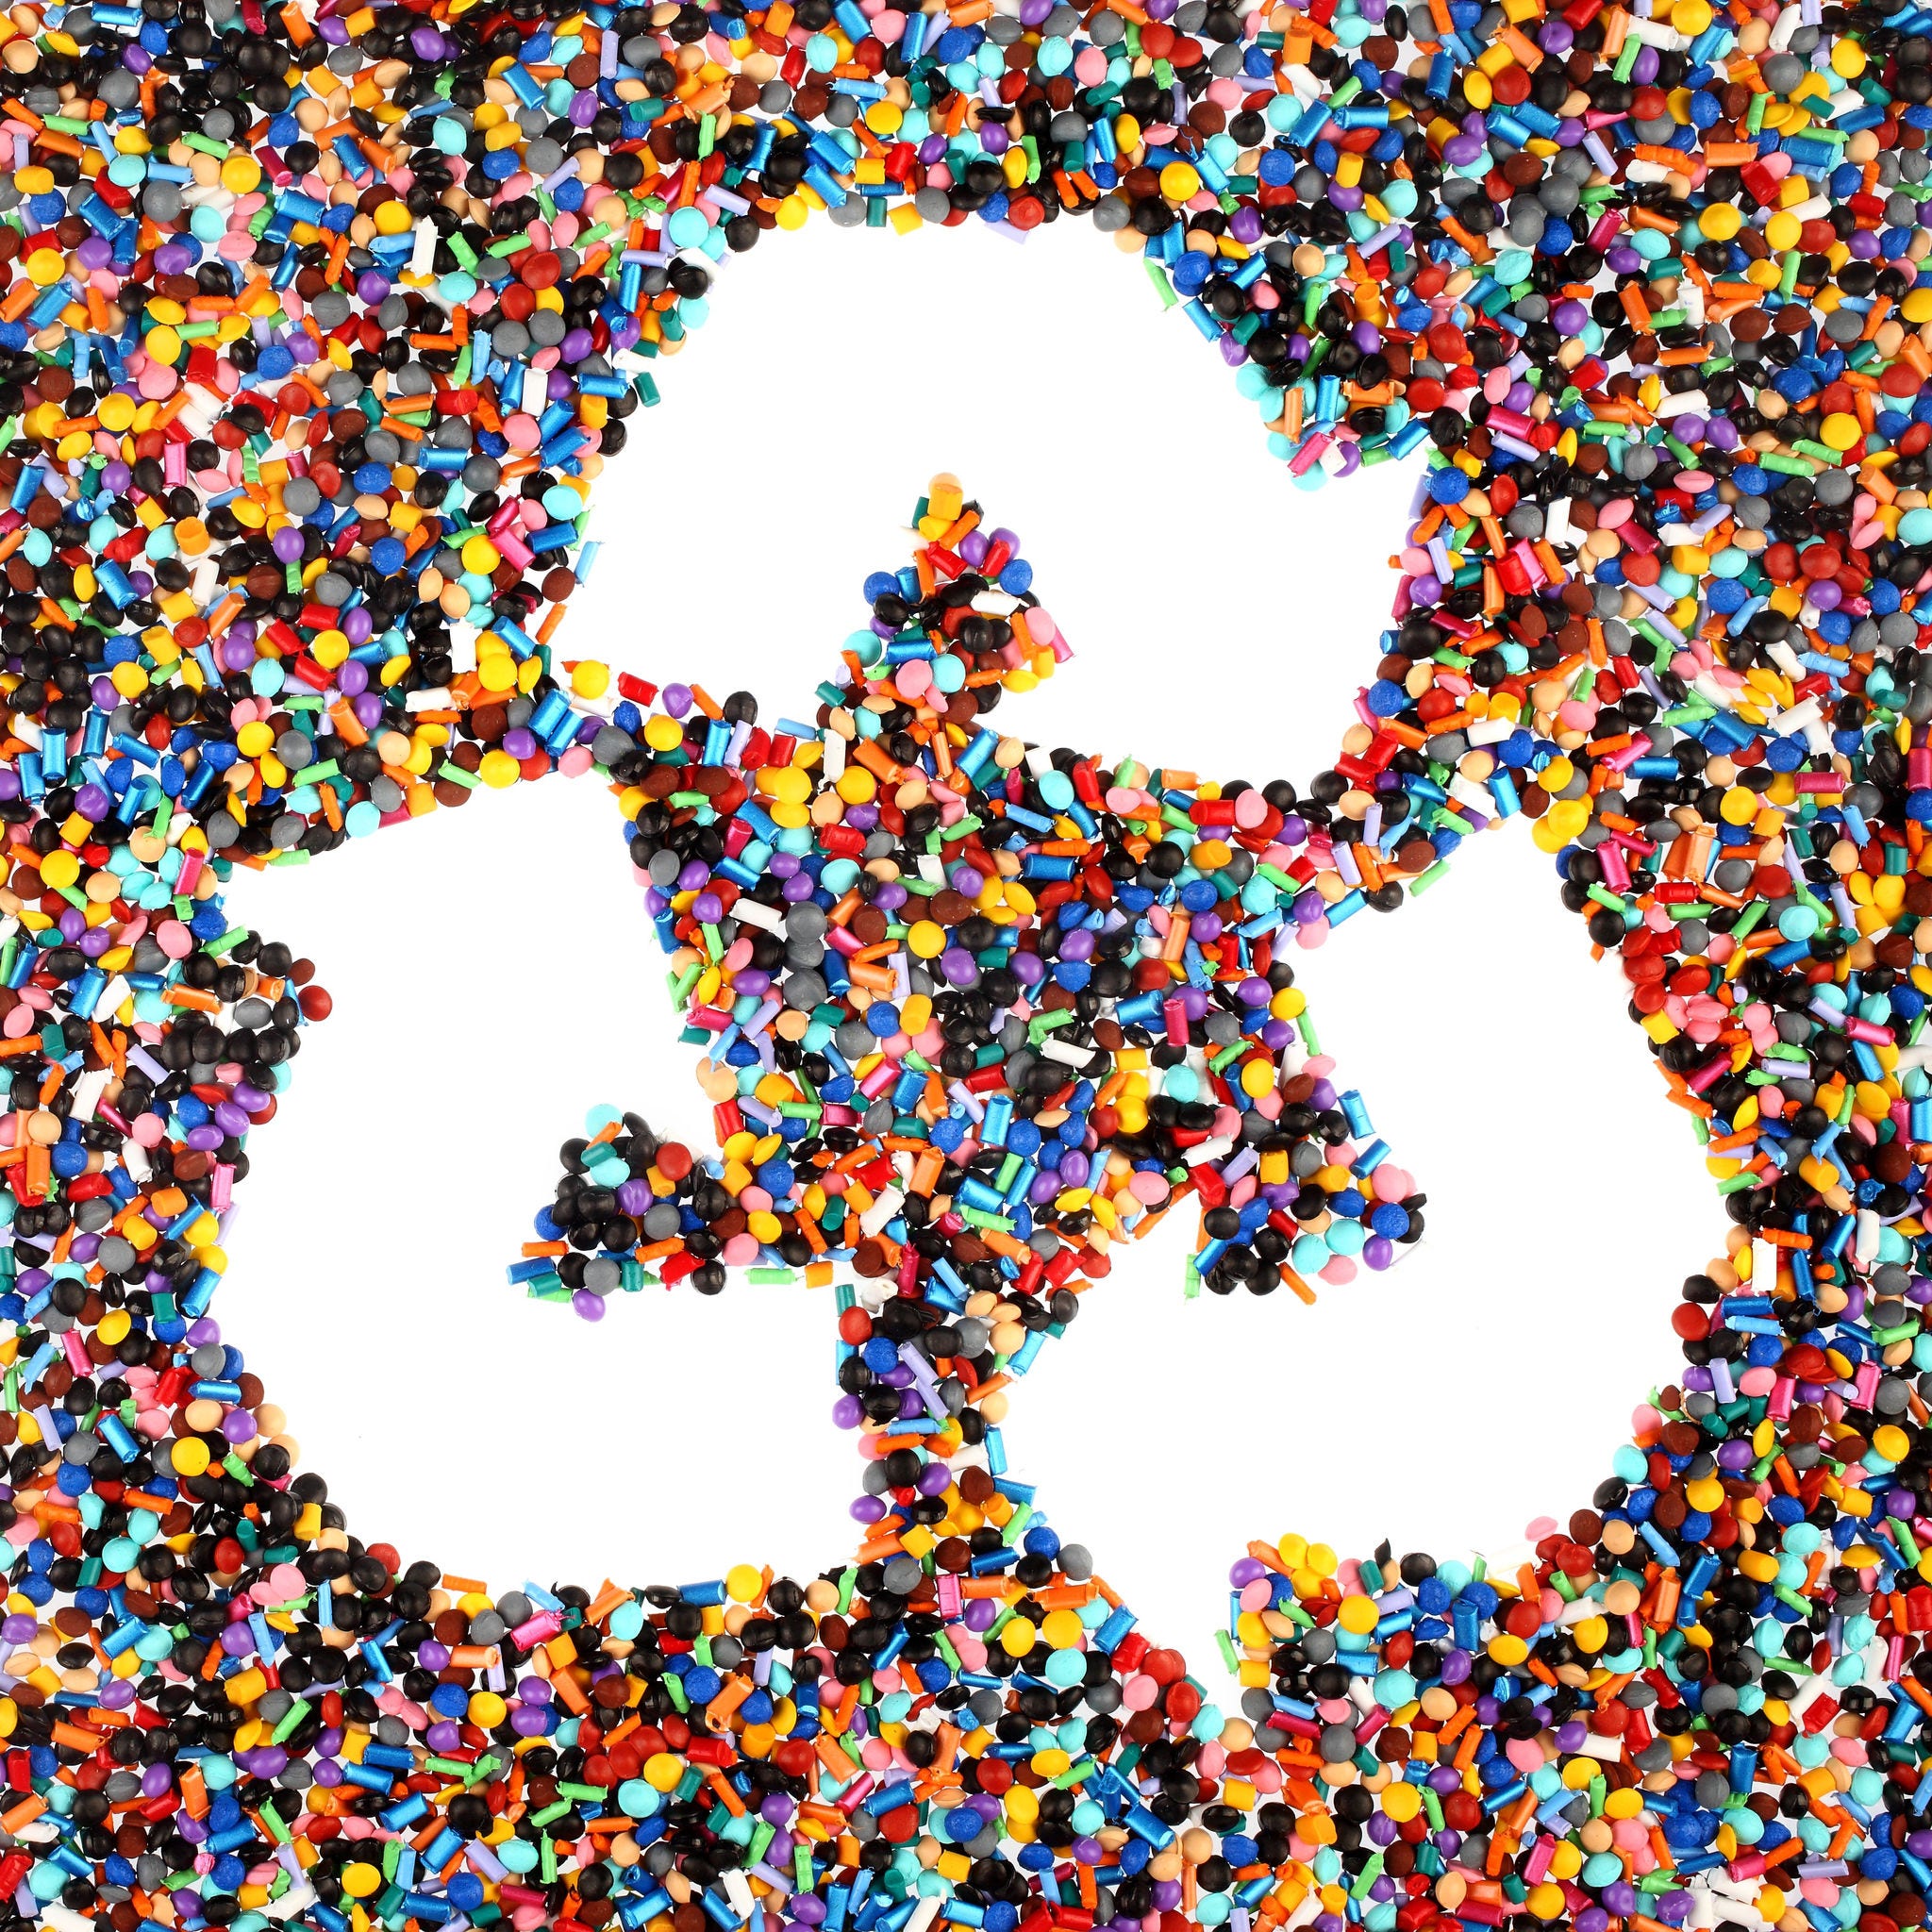 Recycle symbol in the middle of colorful plastic beads